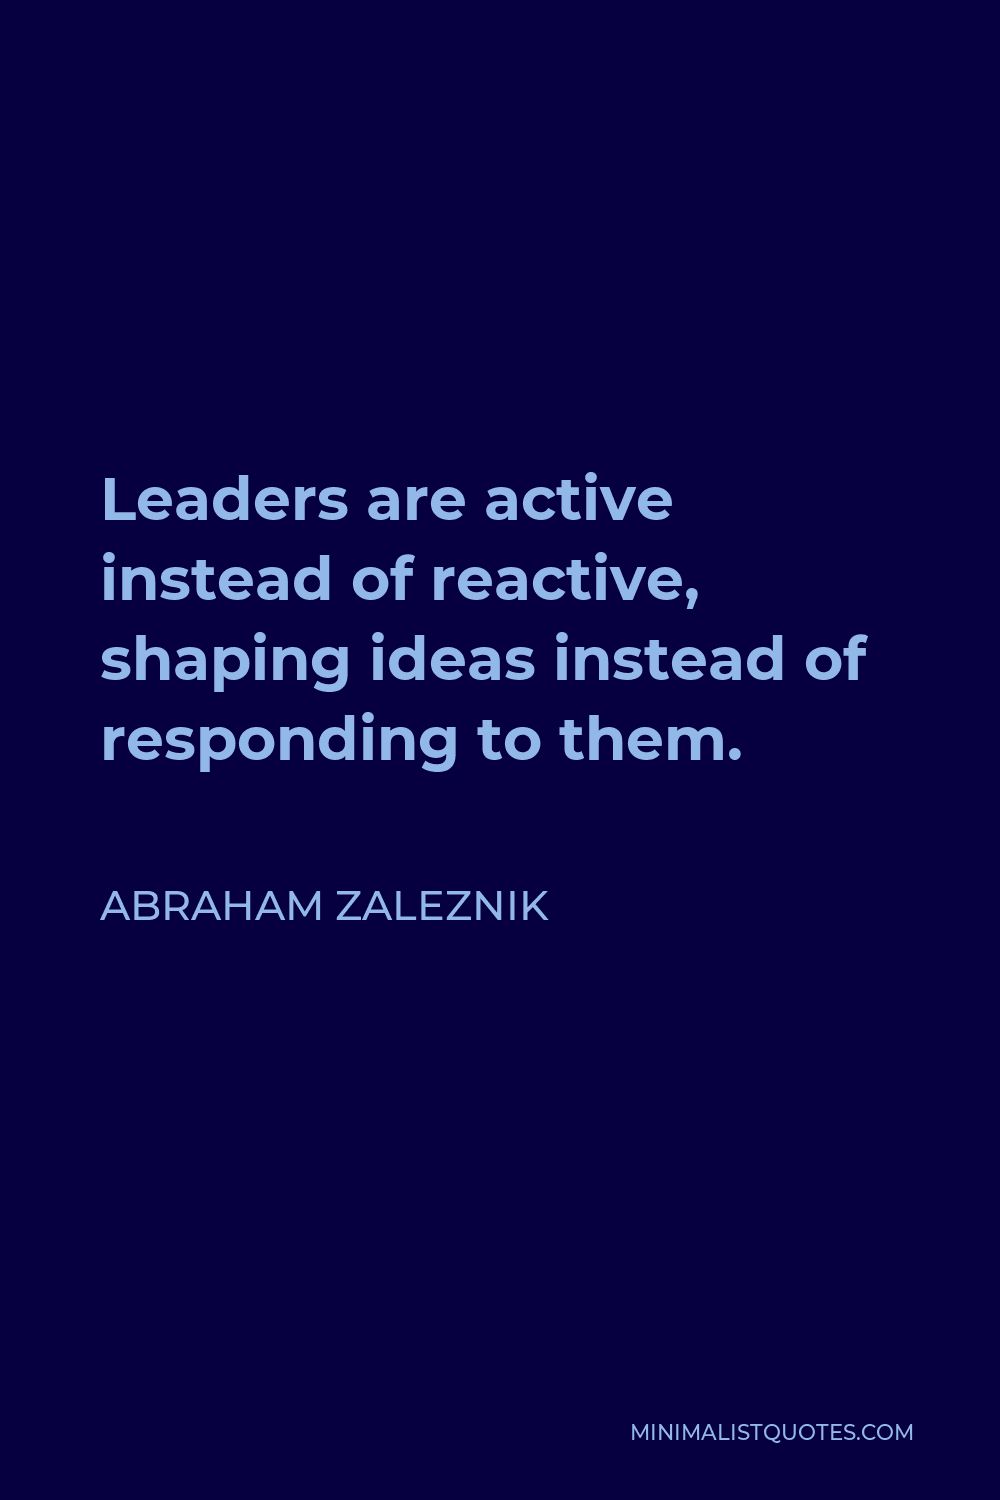 Abraham Zaleznik Quote - Leaders are active instead of reactive, shaping ideas instead of responding to them.